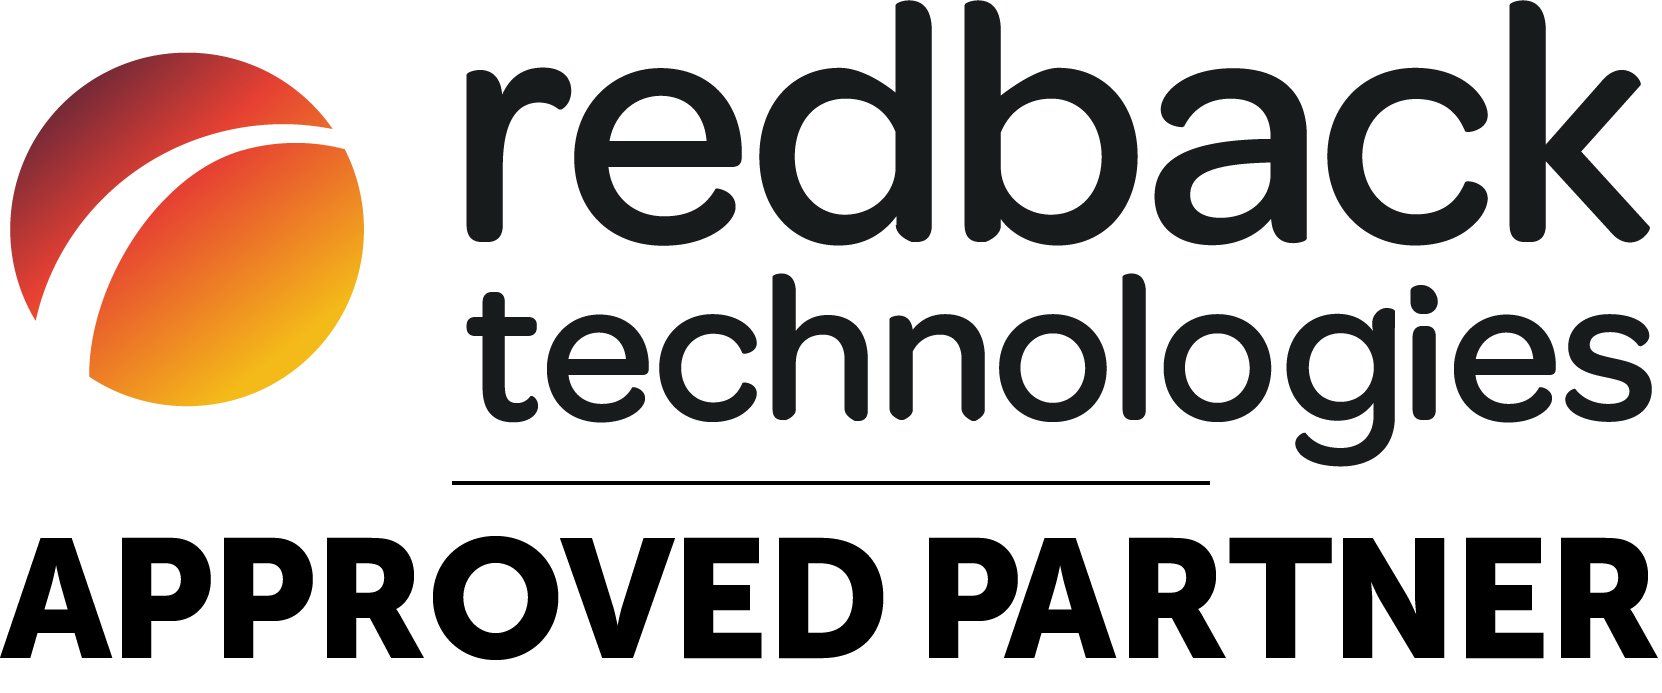 redback technologies is an approved partner of redback technologies .